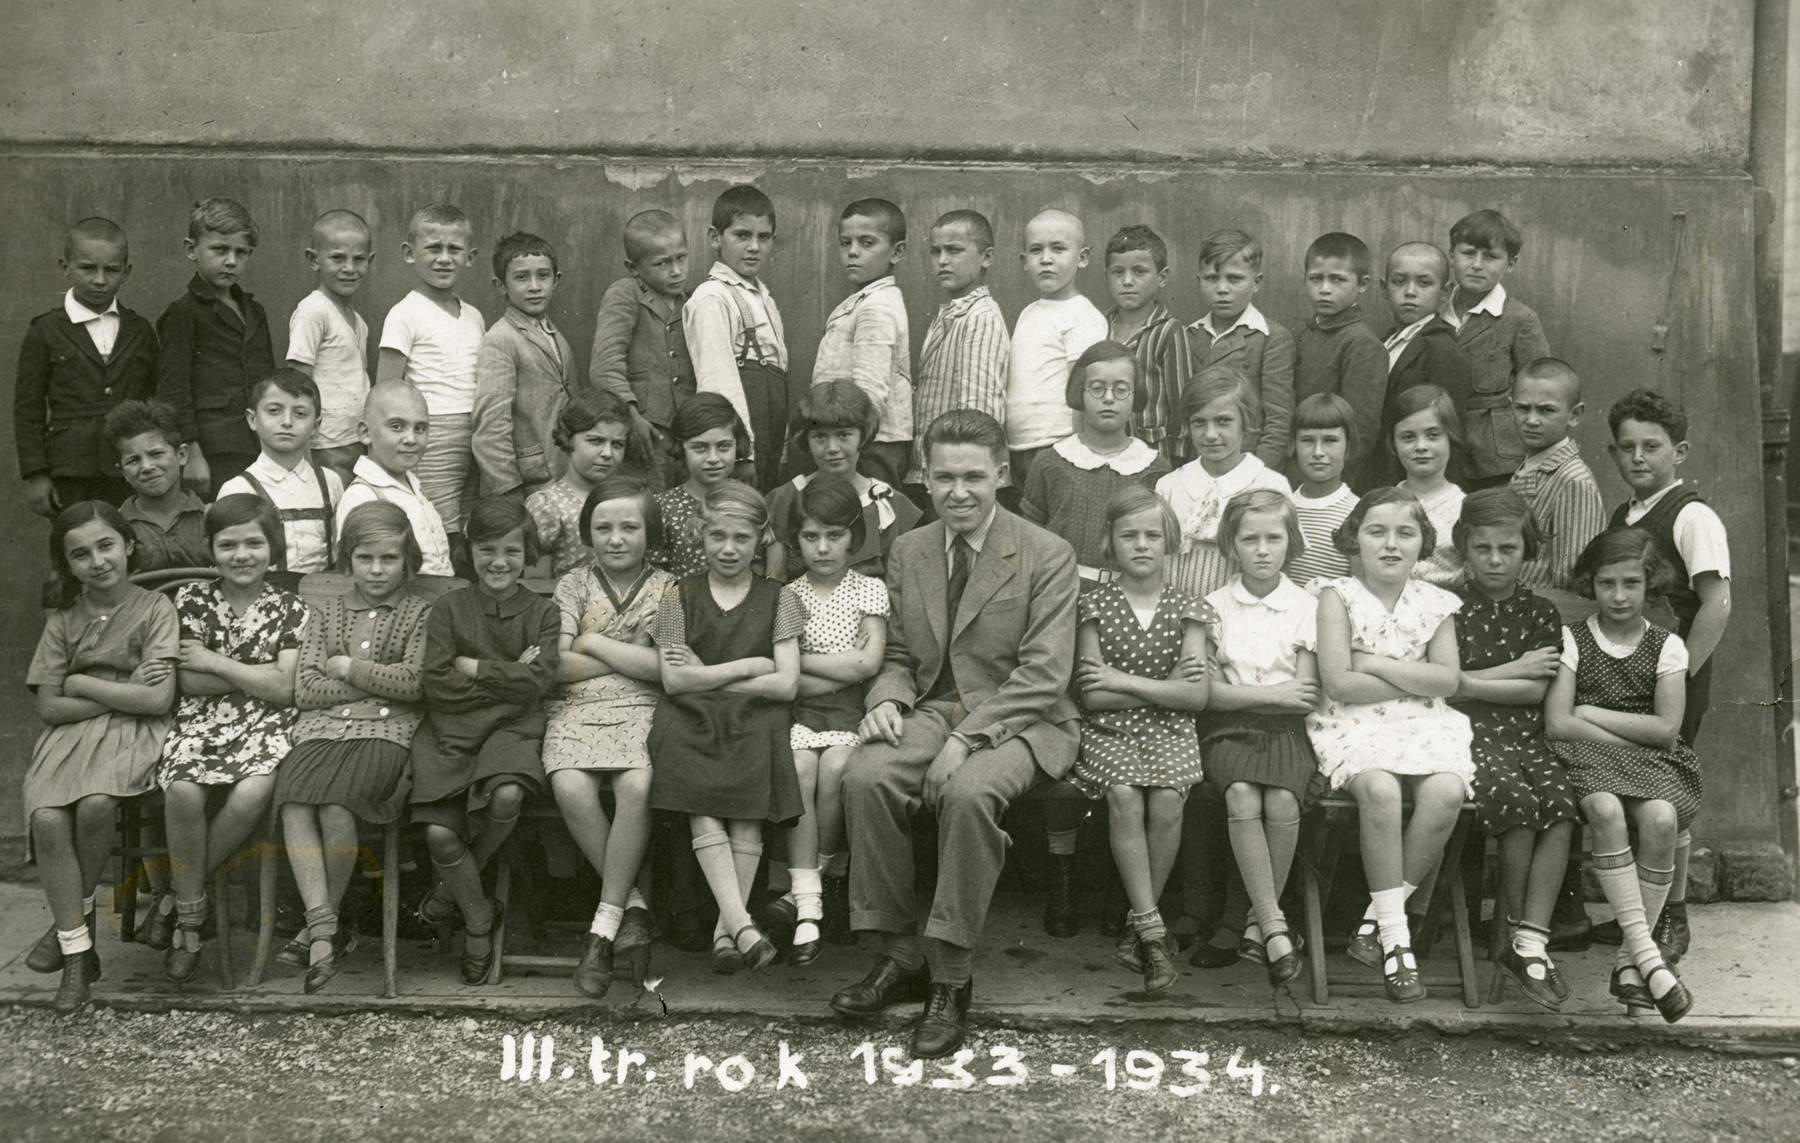 Children in the third grade of the Jewish elementary school in Zilina.

Among those pictured is the teacher Simon Goldberger (later Golan) and Bandi Jaacob Sigmund.   Liselote Stein is seated on the left.  Eva Schneller (later Grunwald) is seated in the front row, on the far right.